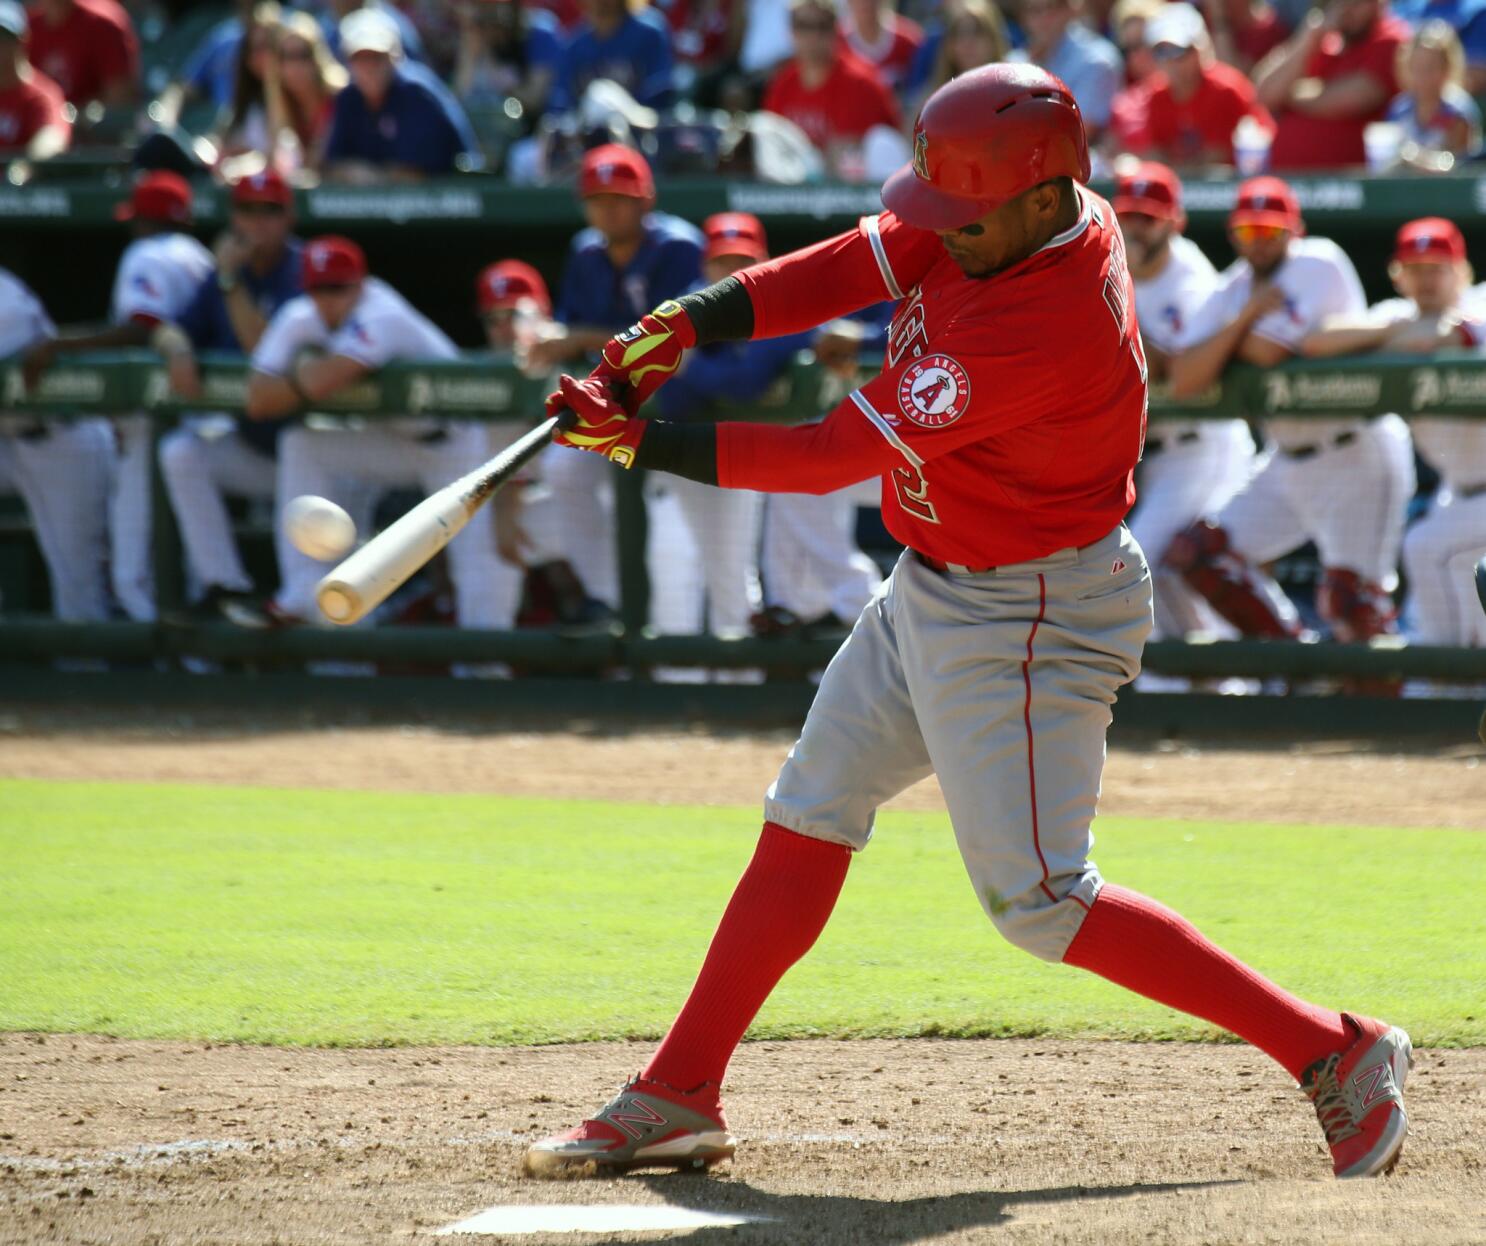 Angels pull off a miraculous rally to defeat Rangers, 11-10 - Los